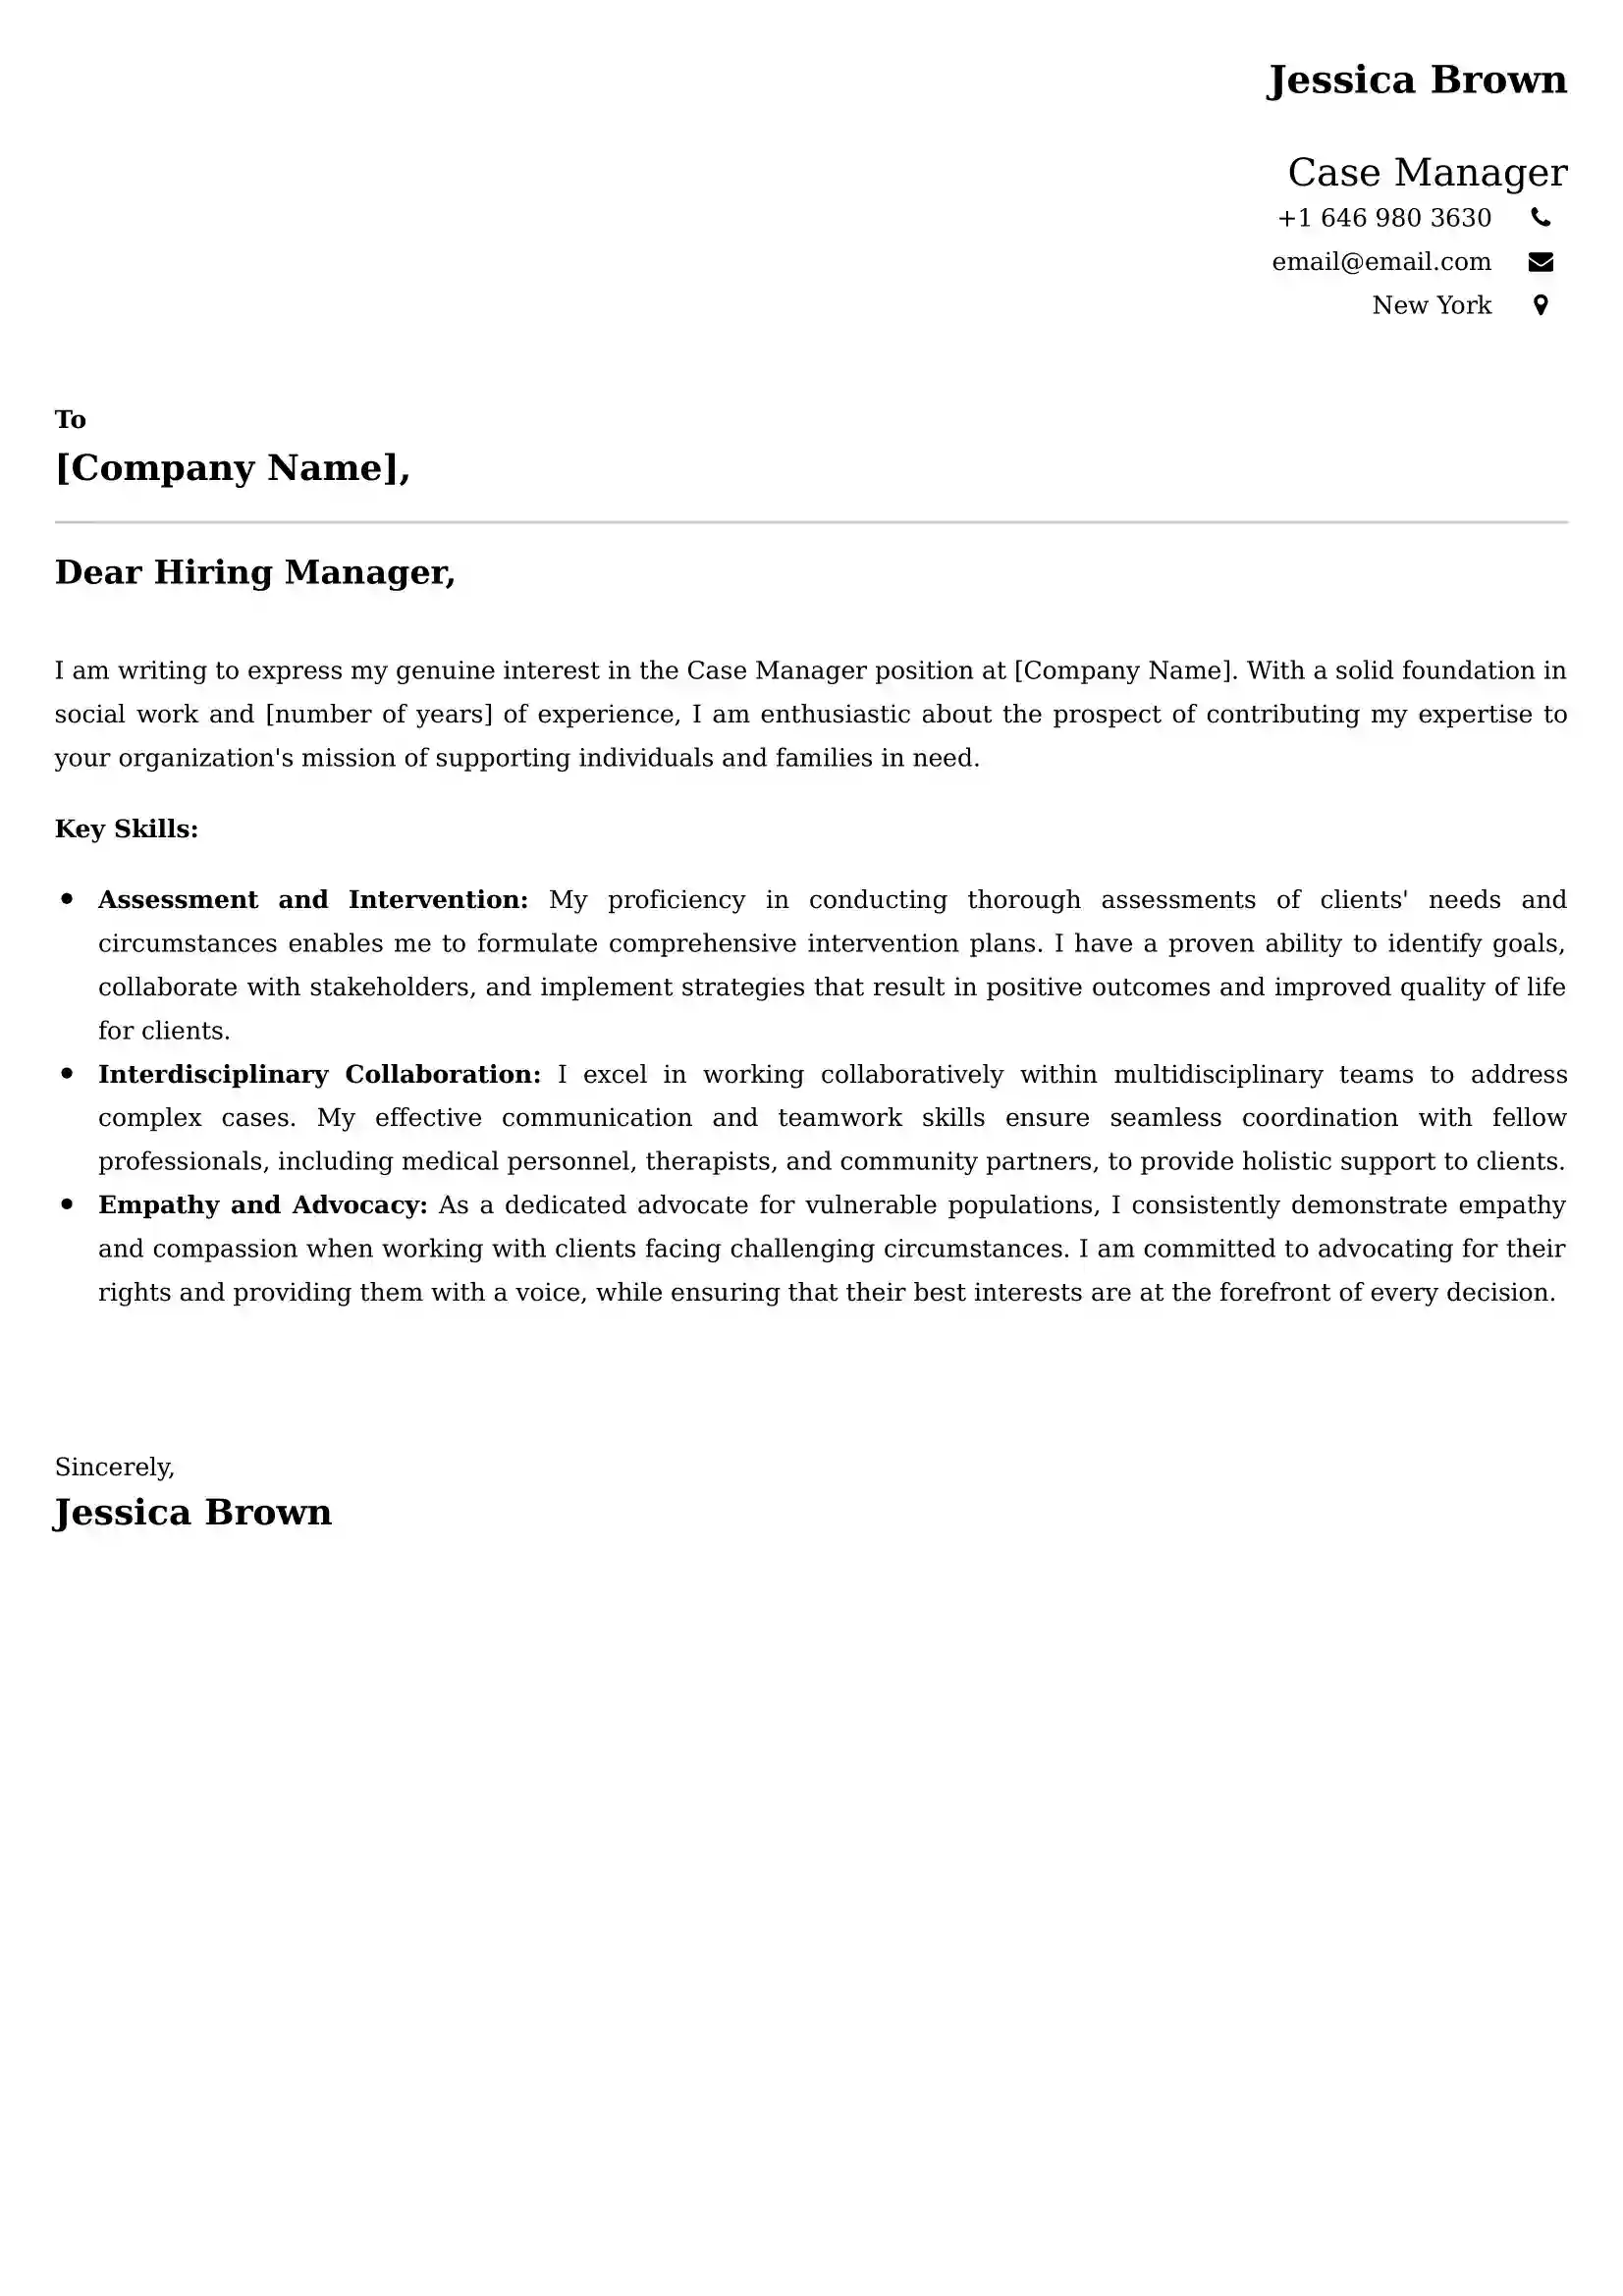 Case Manager Cover Letter Examples - Latest UK Format